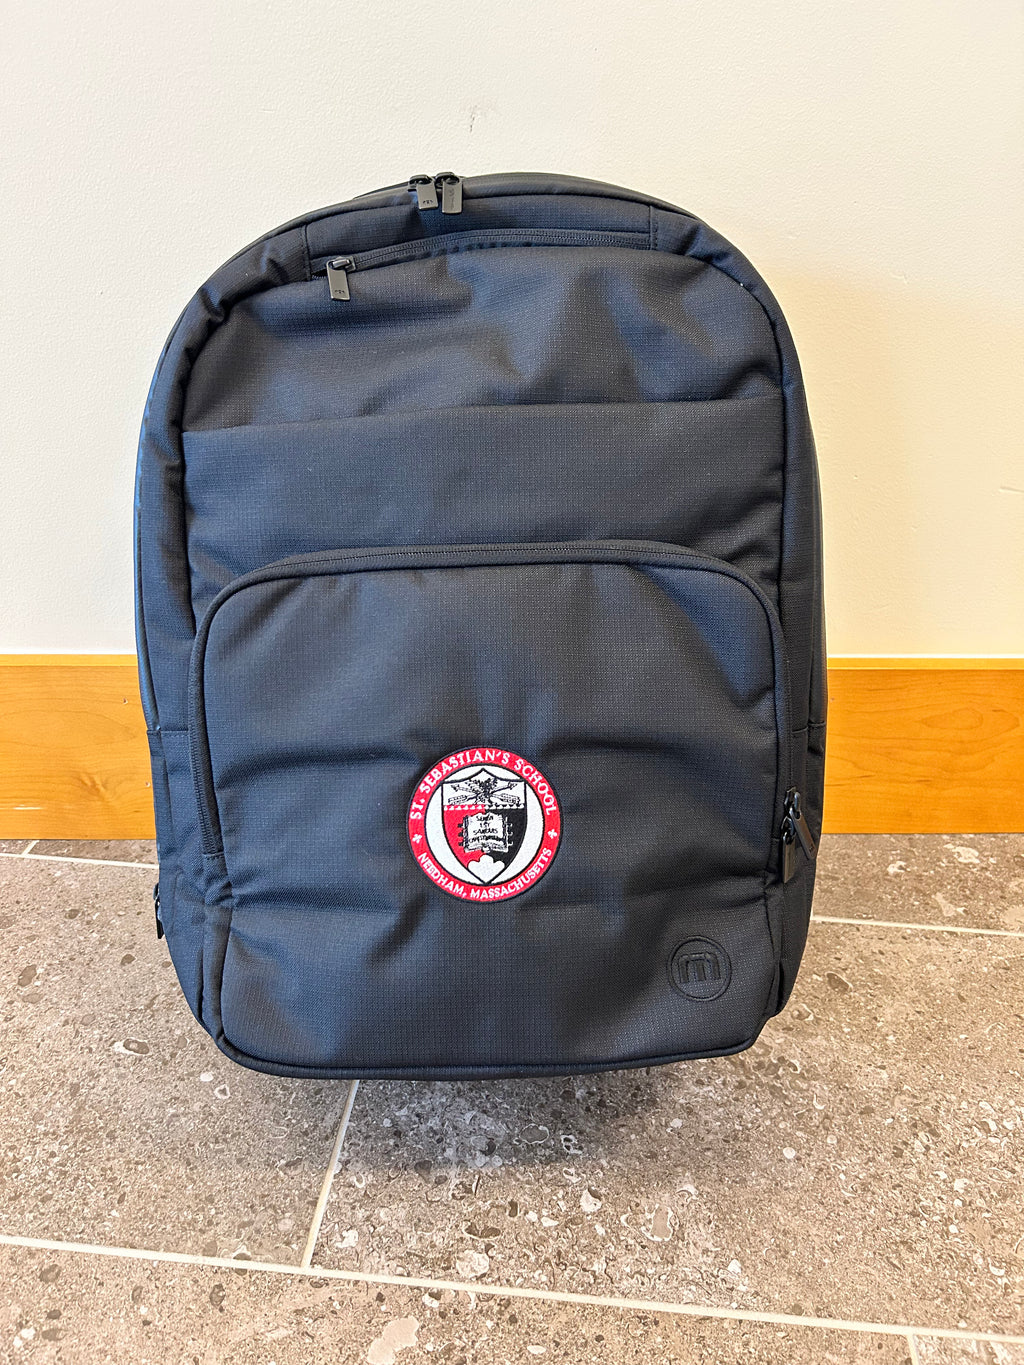 Backpack-TM-23/24-1st Class